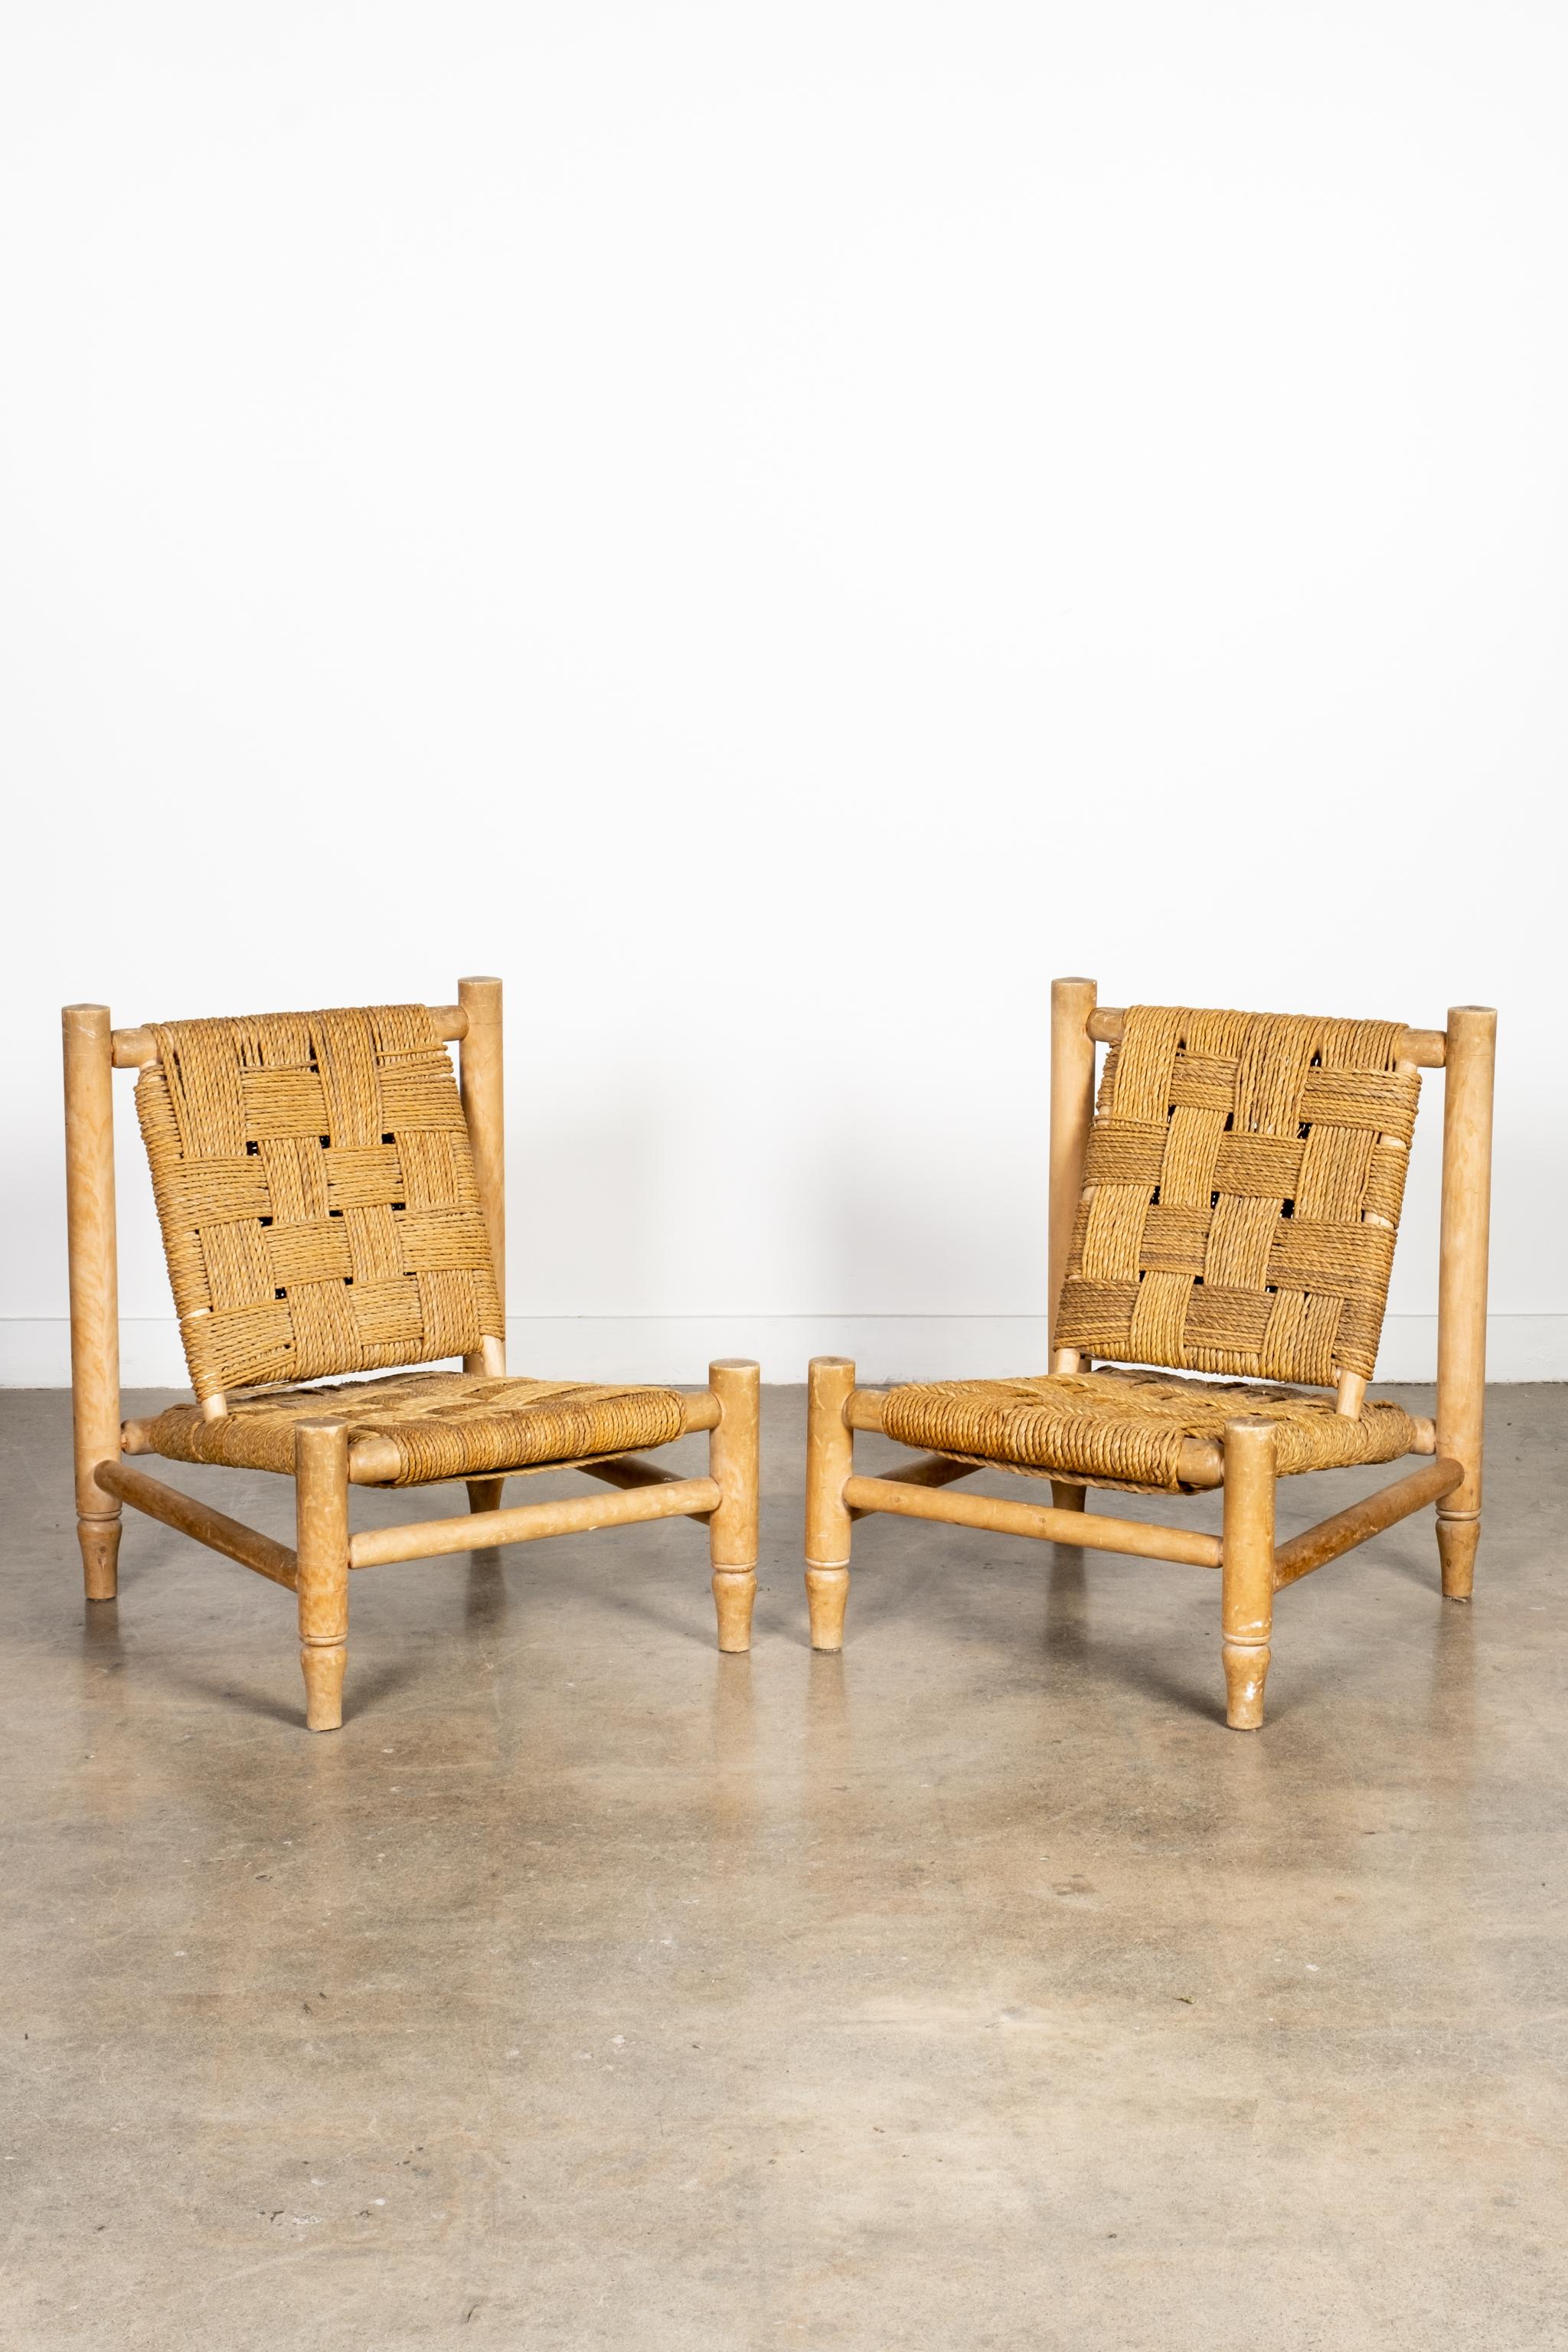 Mid-Century Modern Pair of 1950s Wood and Woven Rope Lounge Chairs by Adrien Audoux & Frida Minet